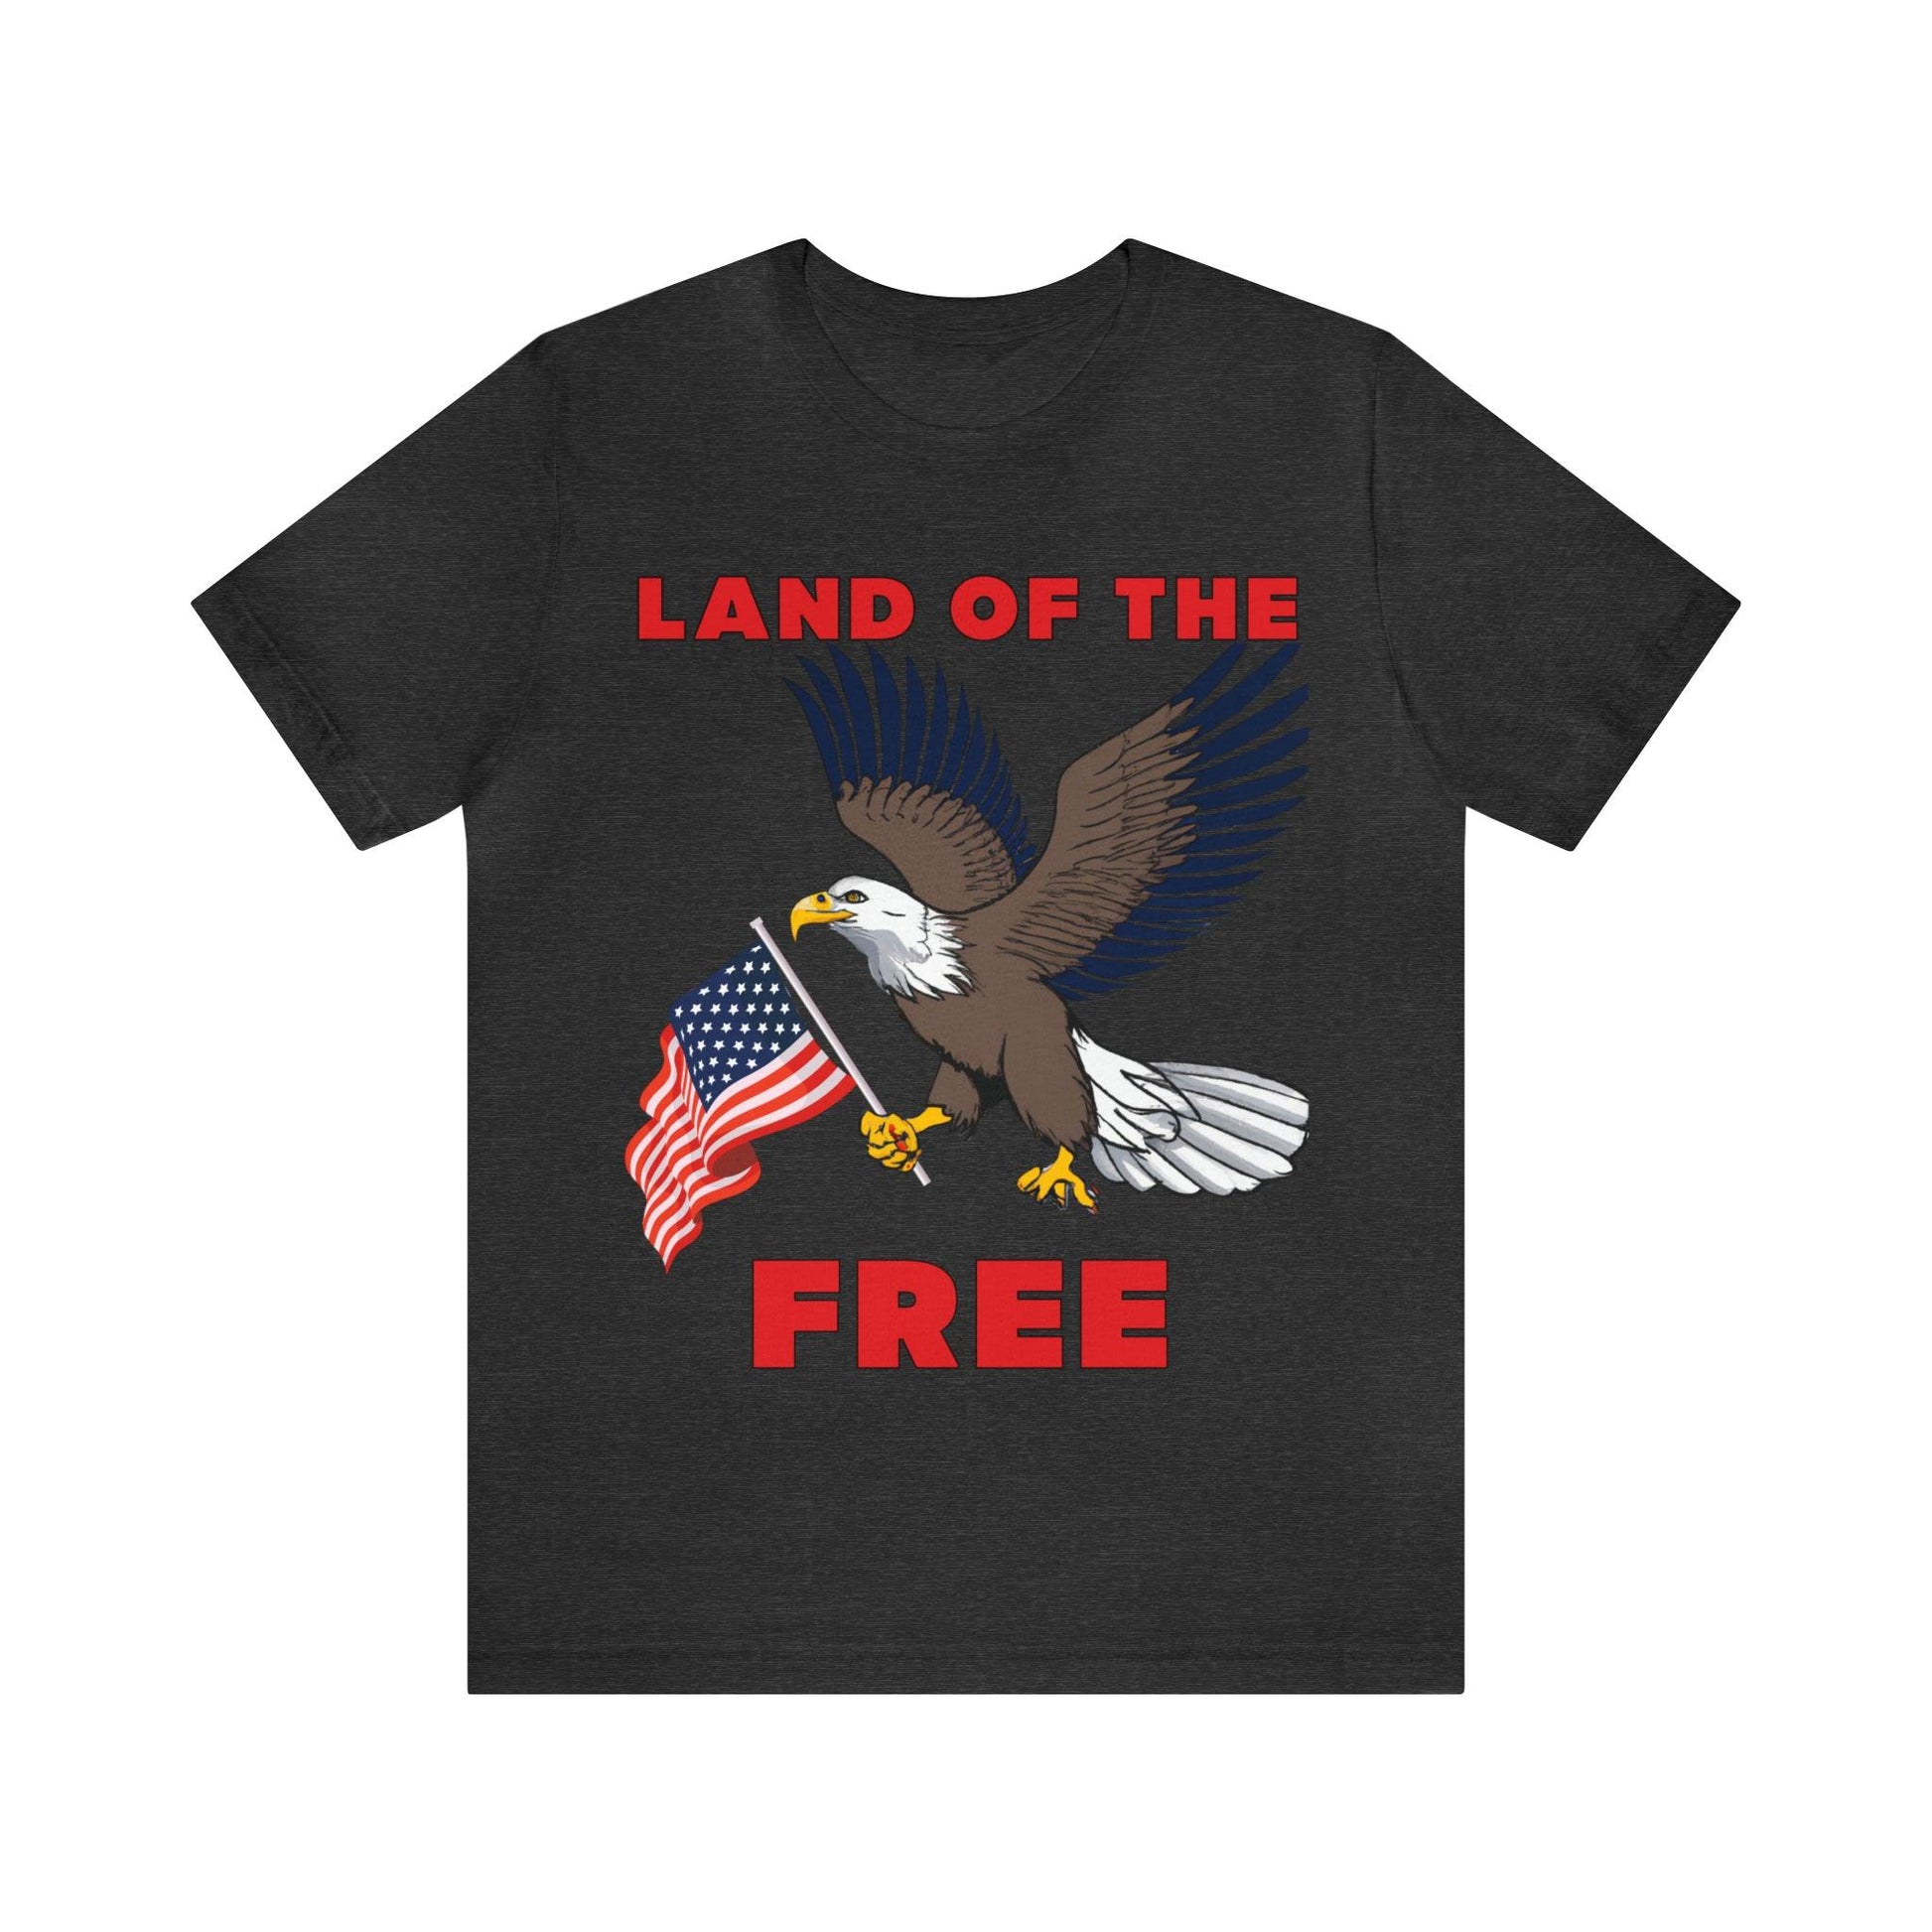 Land of the Free: Celebrate Independence Day with Patriotic Shirts, Flag shirt - Freedom, Fireworks, and More - Giftsmojo